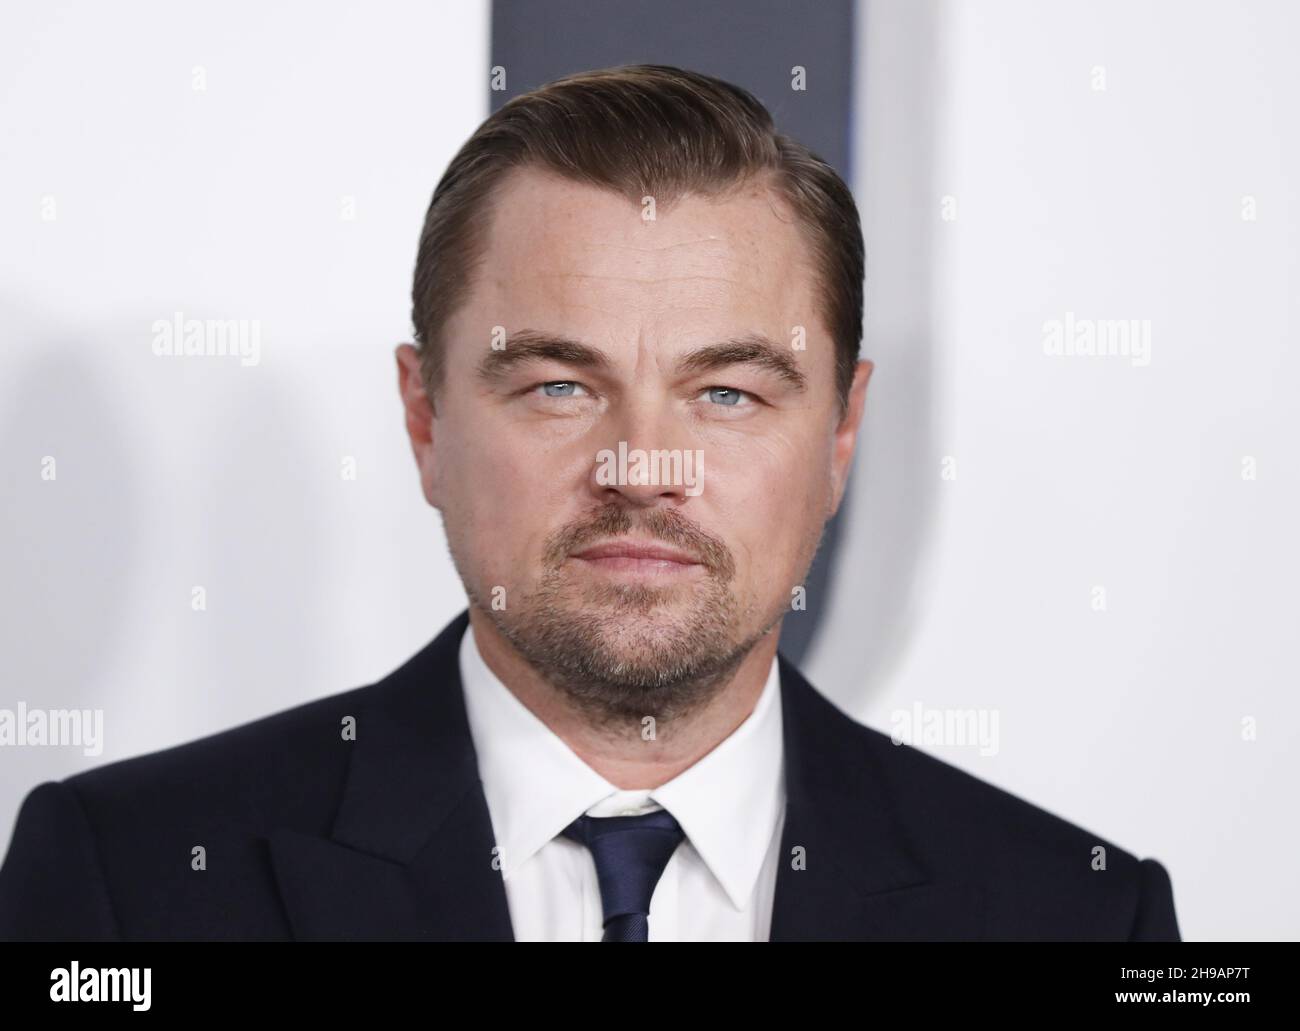 New York, United States. 05th Dec, 2021. Leonardo DiCaprio arrives on the red carpet at the world premiere of Netflix's 'Don't Look Up' on Sunday, December 05, 2021 in New York City. Photo by John Angelillo/UPI Credit: UPI/Alamy Live News Stock Photo